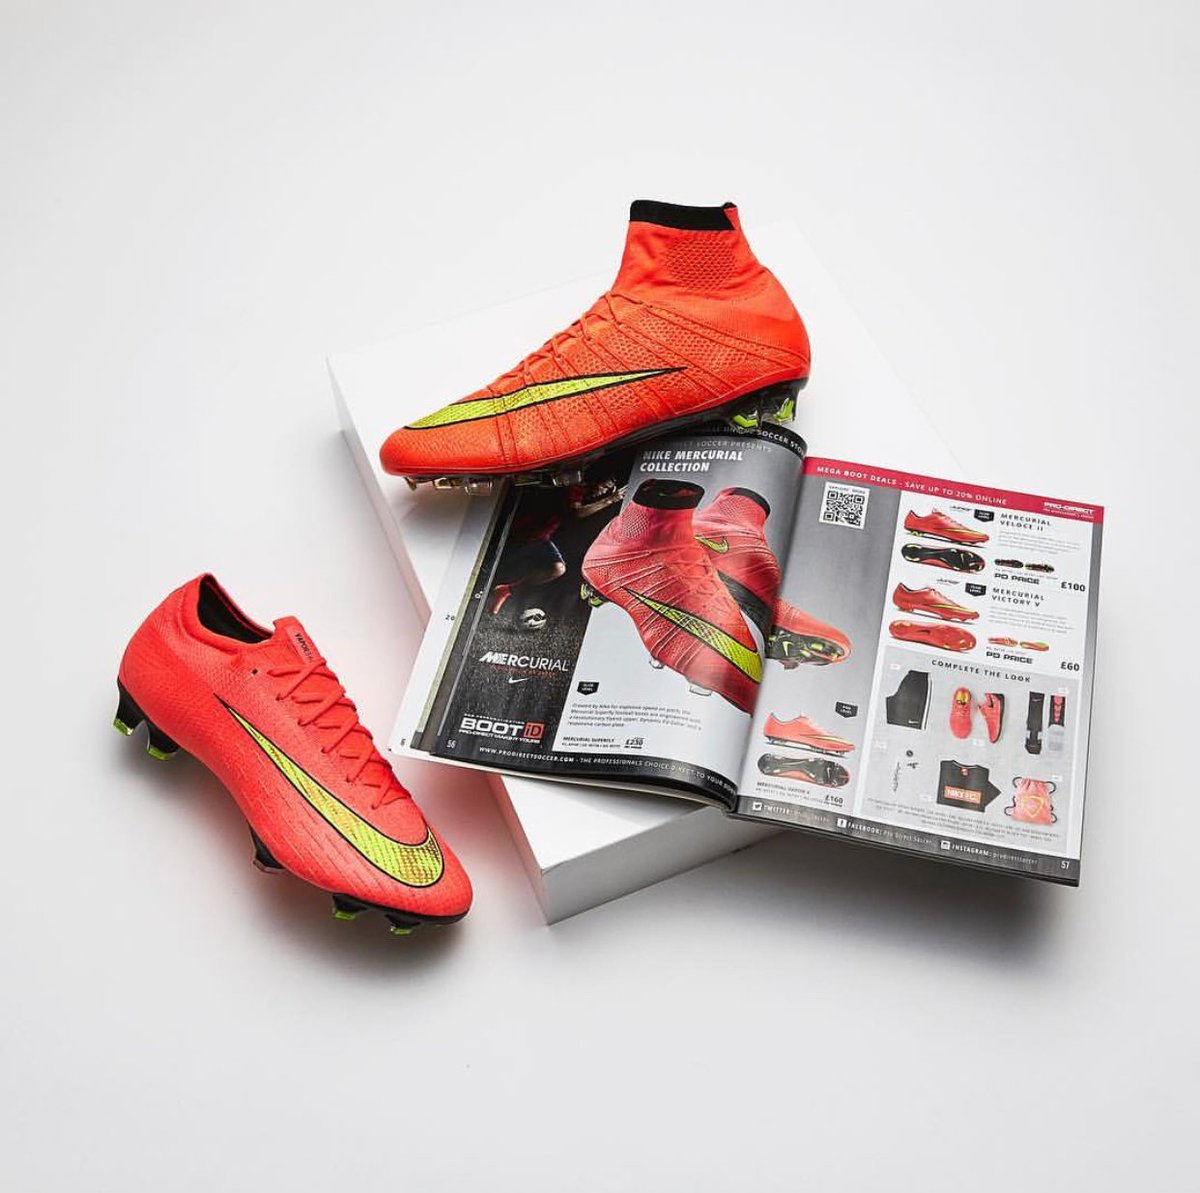 Pro:Direct Soccer on Twitter: "Time ⏱ Taking you back to the 2014 World Cup with the @nikefootball Mercurial IV. first with a dynamic fit collar. https://t.co/nM9csuM4ix" / Twitter